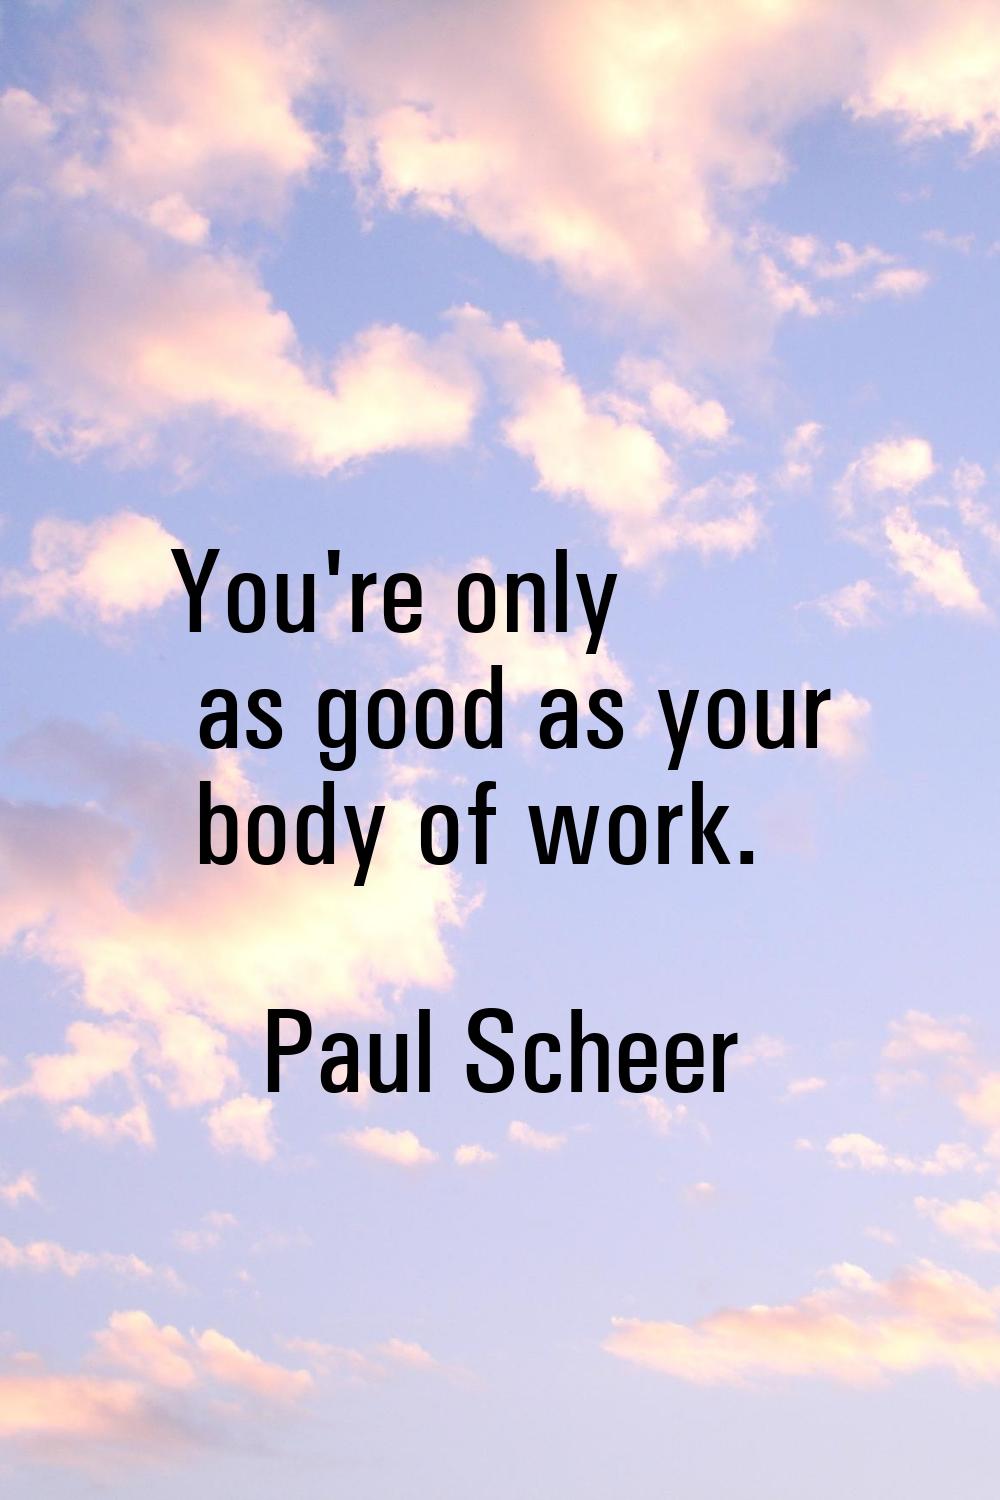 You're only as good as your body of work.